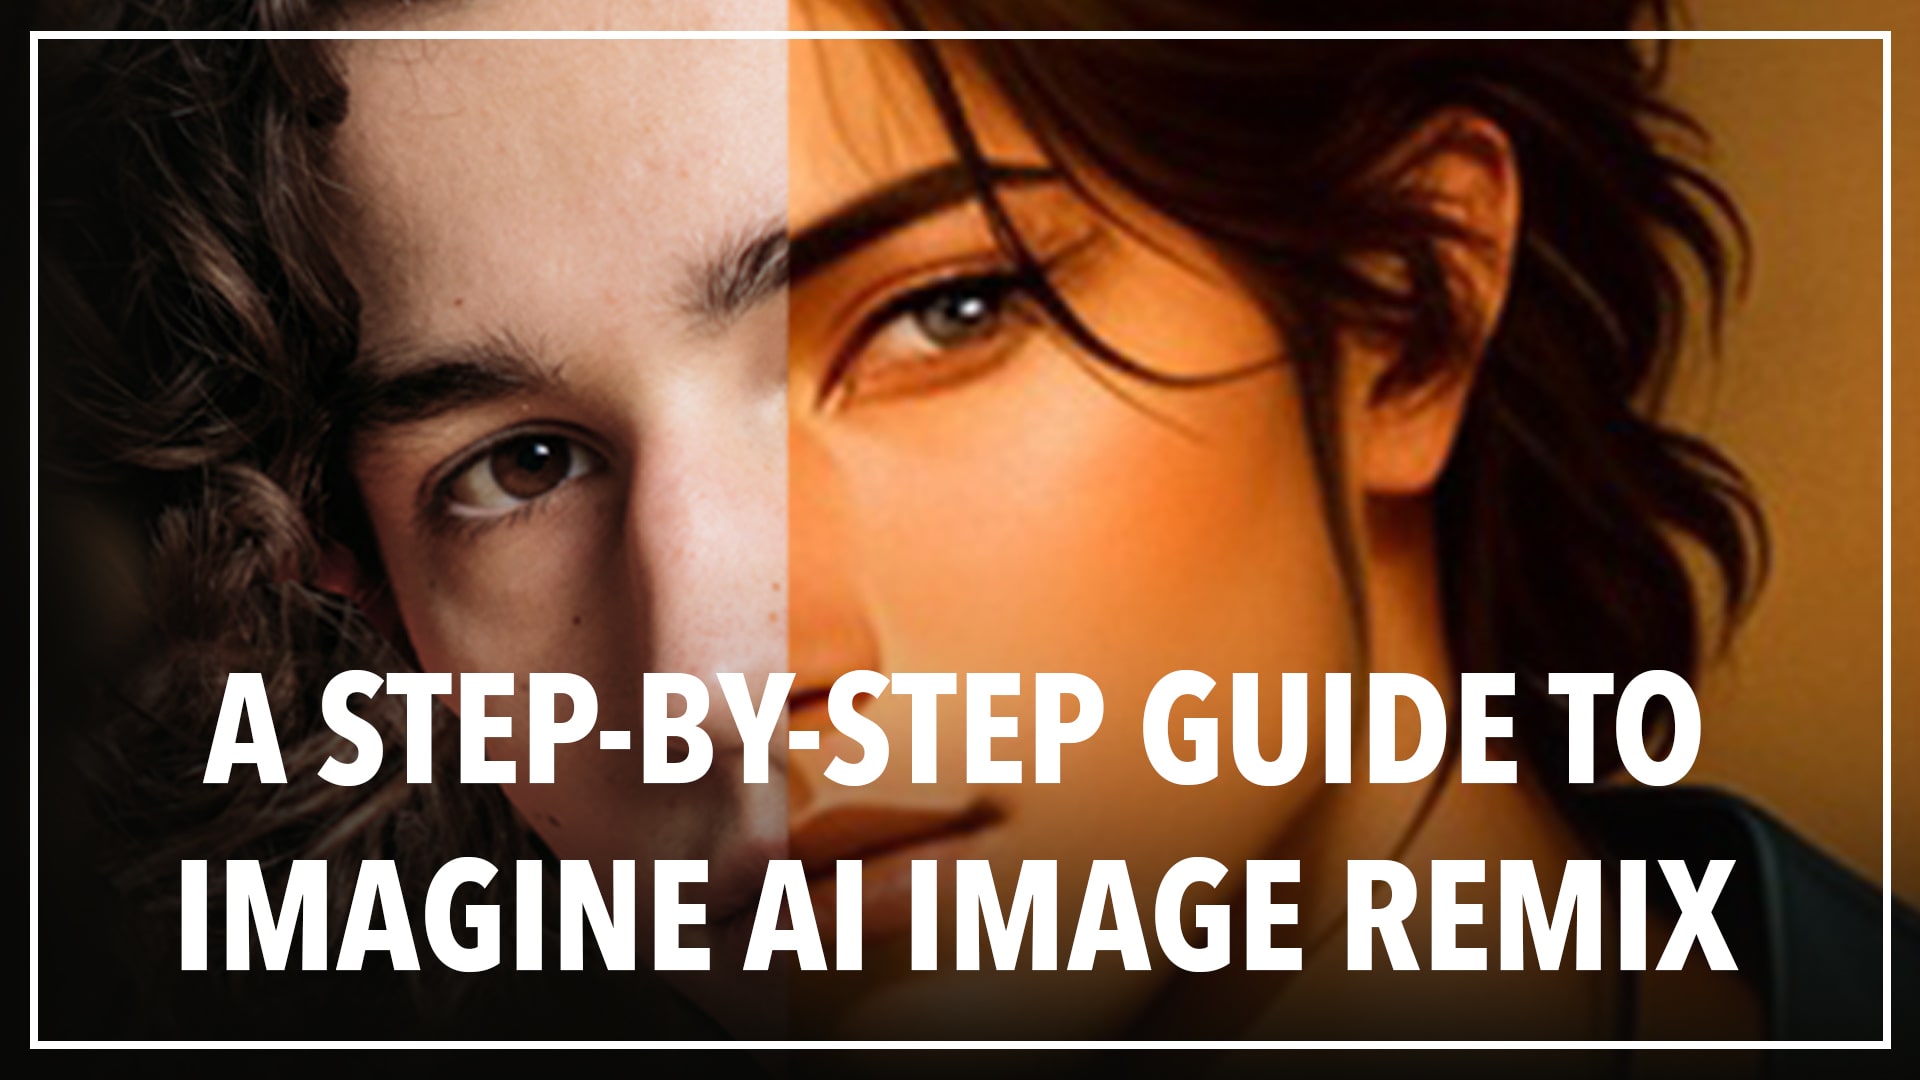 Transform Your Images: A Step-by-Step Guide to Imagine AI Image Remix